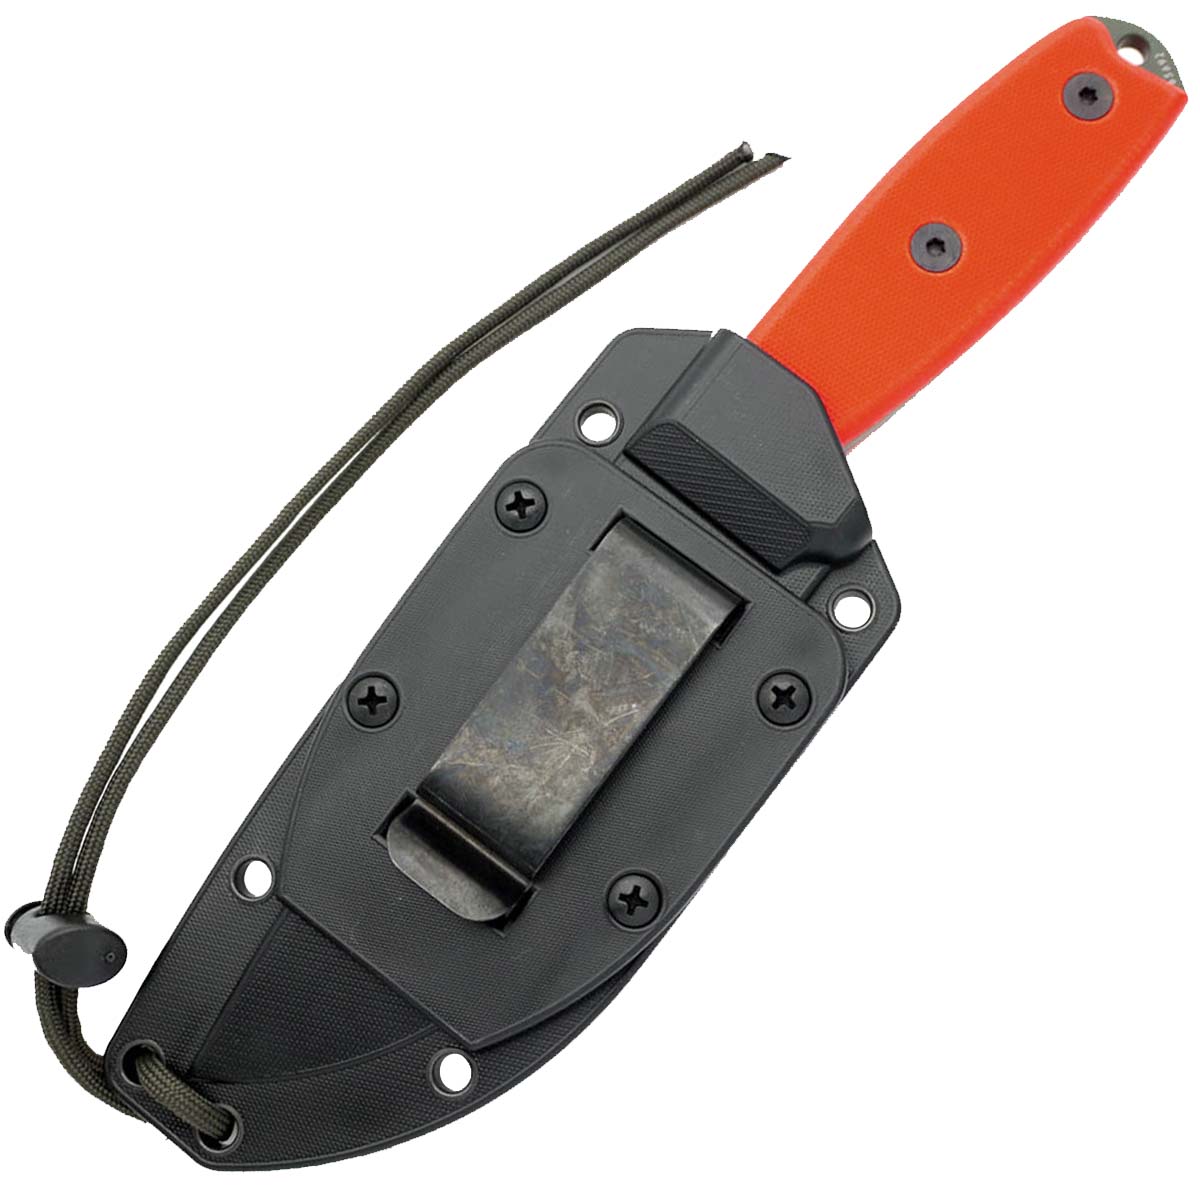 ESEE 4S-MB-OD Foliage Green with Orange G10 Handle Knife